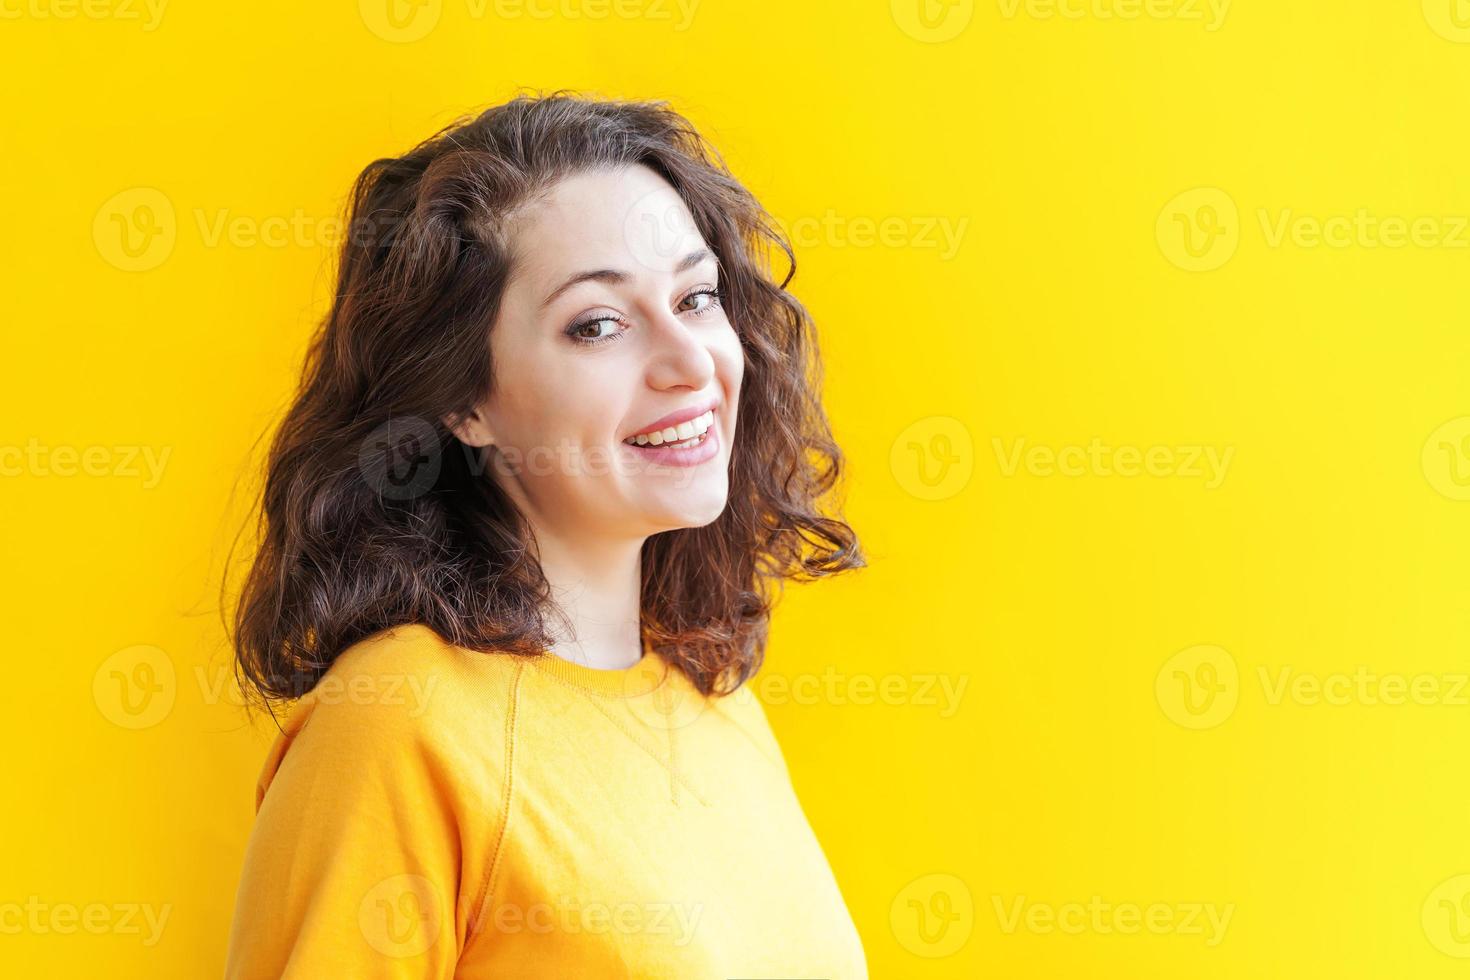 Happy girl smiling. Beauty portrait young happy positive laughing brunette woman on yellow background isolated. European woman. Positive human emotion facial expression body language photo